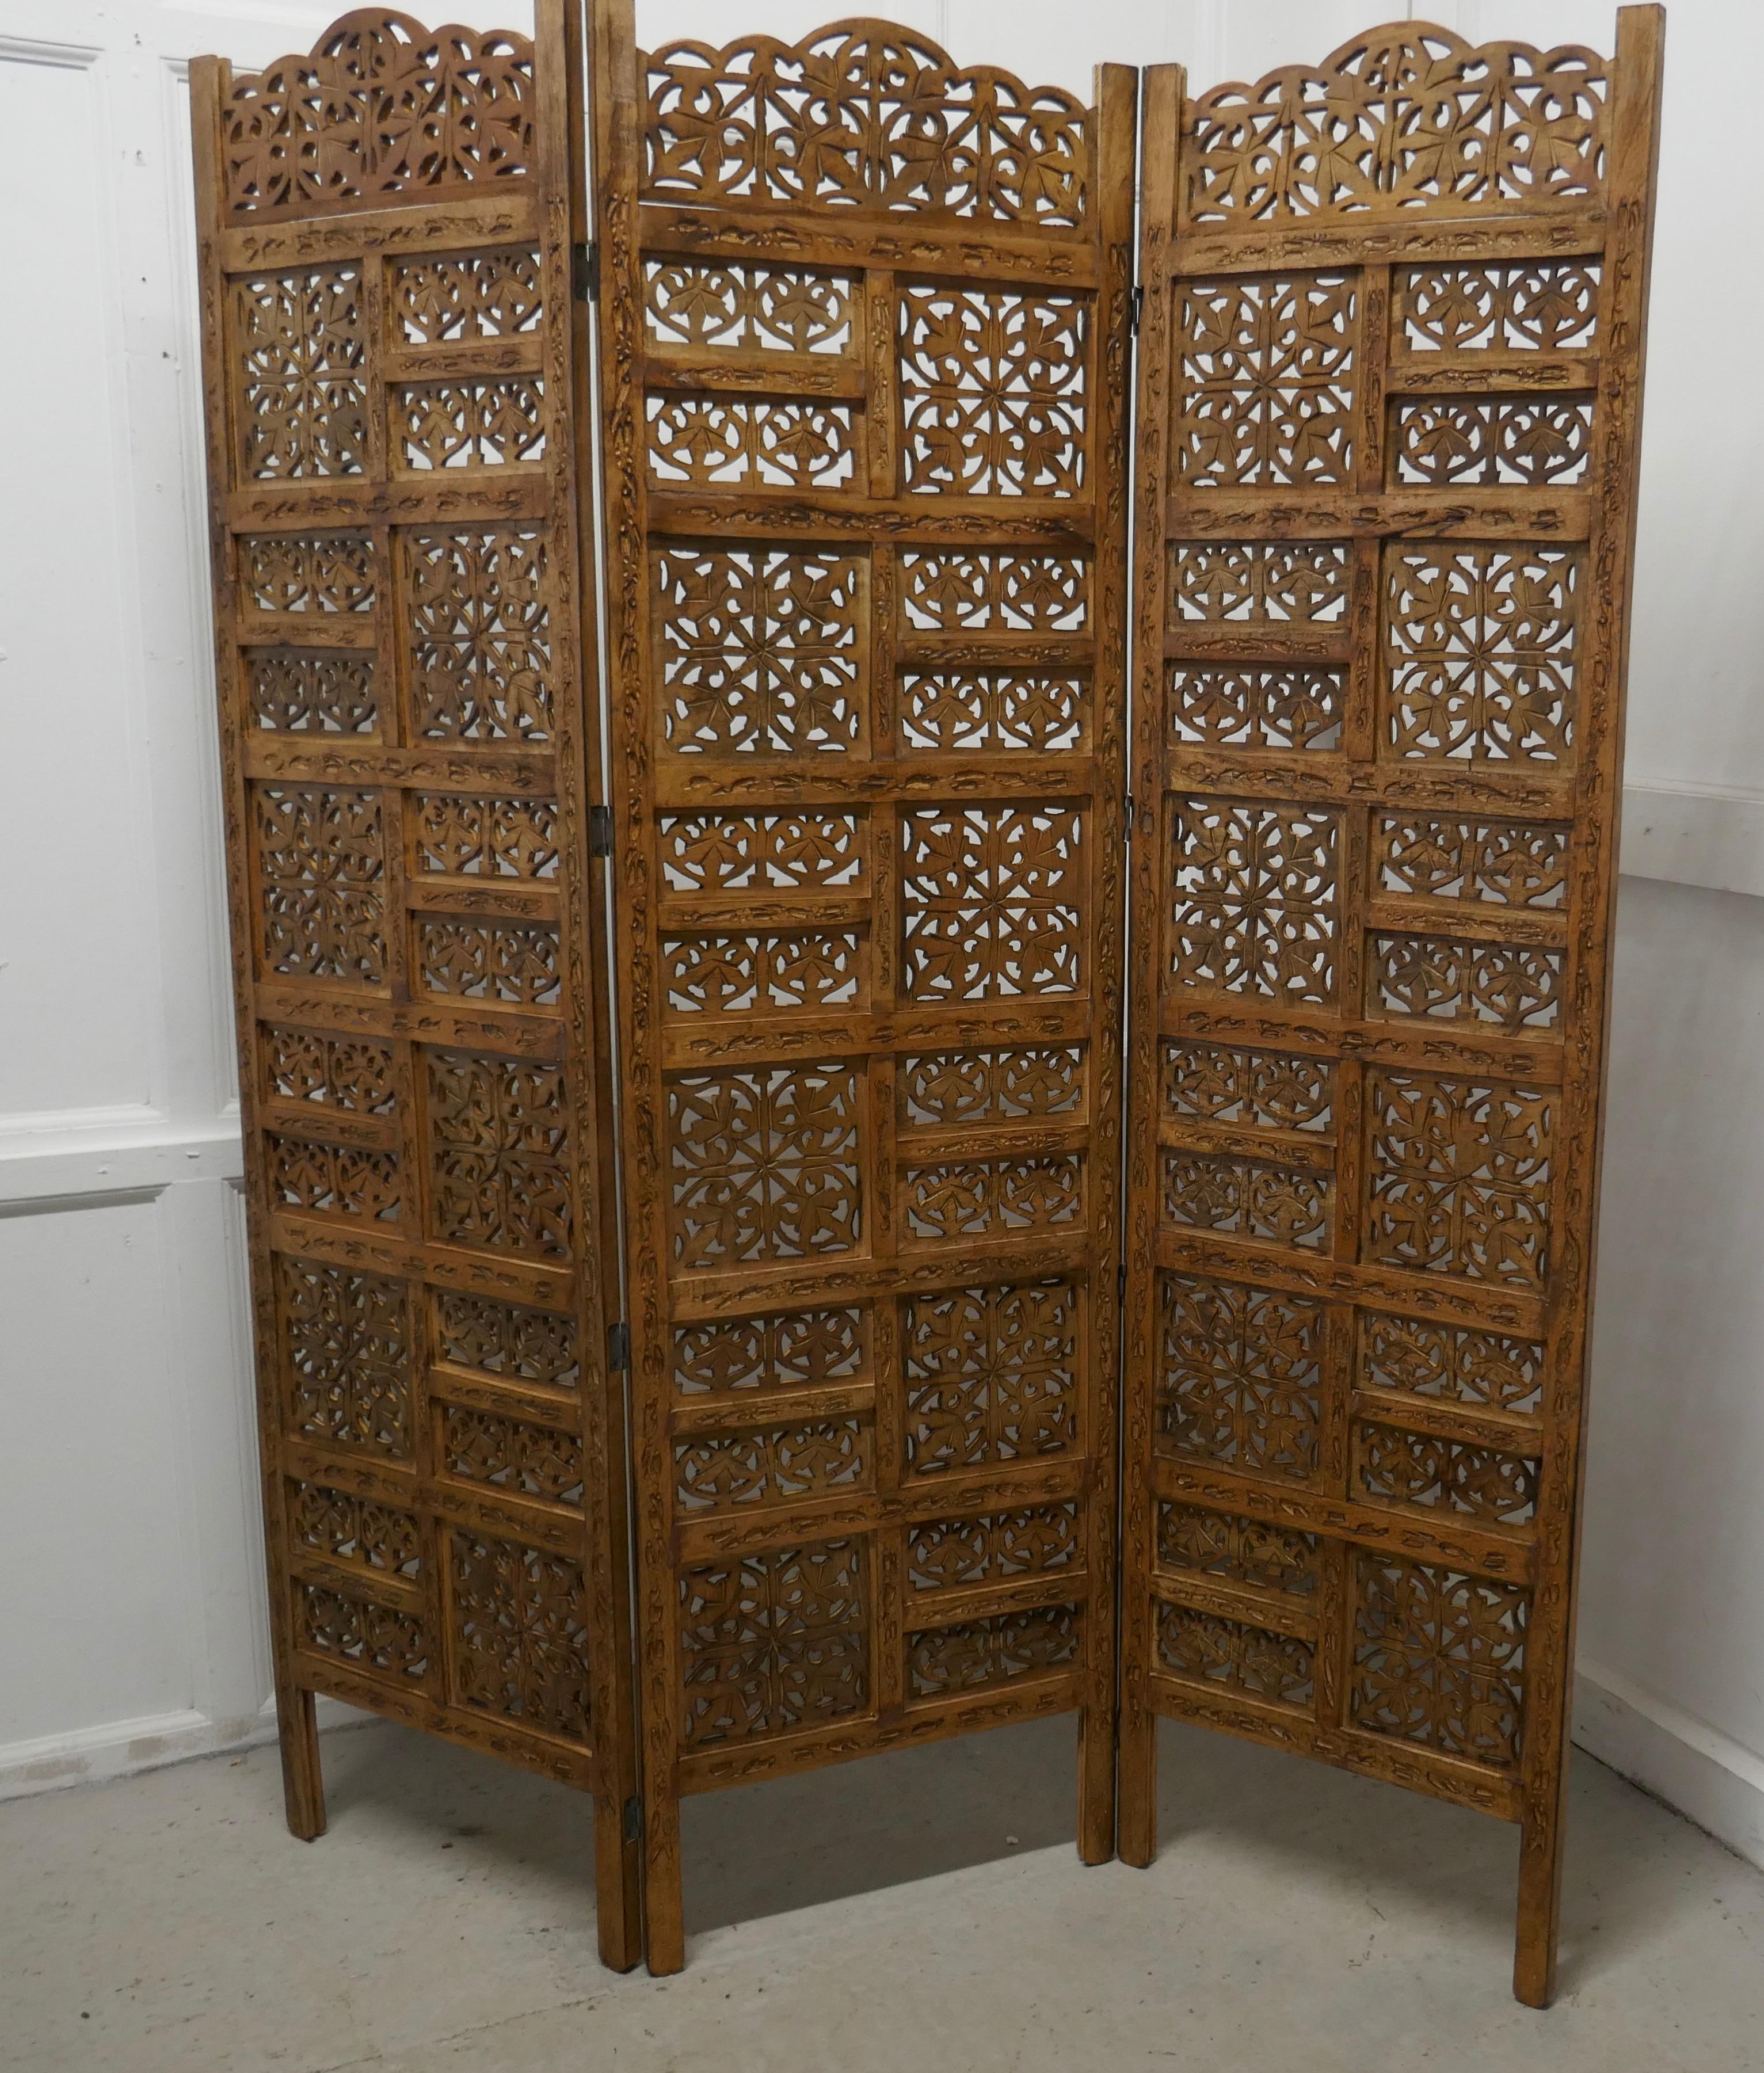 Large North African carved pierced 3 fold screen

This is an attractive and heavy piece it is made from 3 carved panels, the design is mainly leaves and flowers, each panel has an arched top and both the front and the back of the screen are